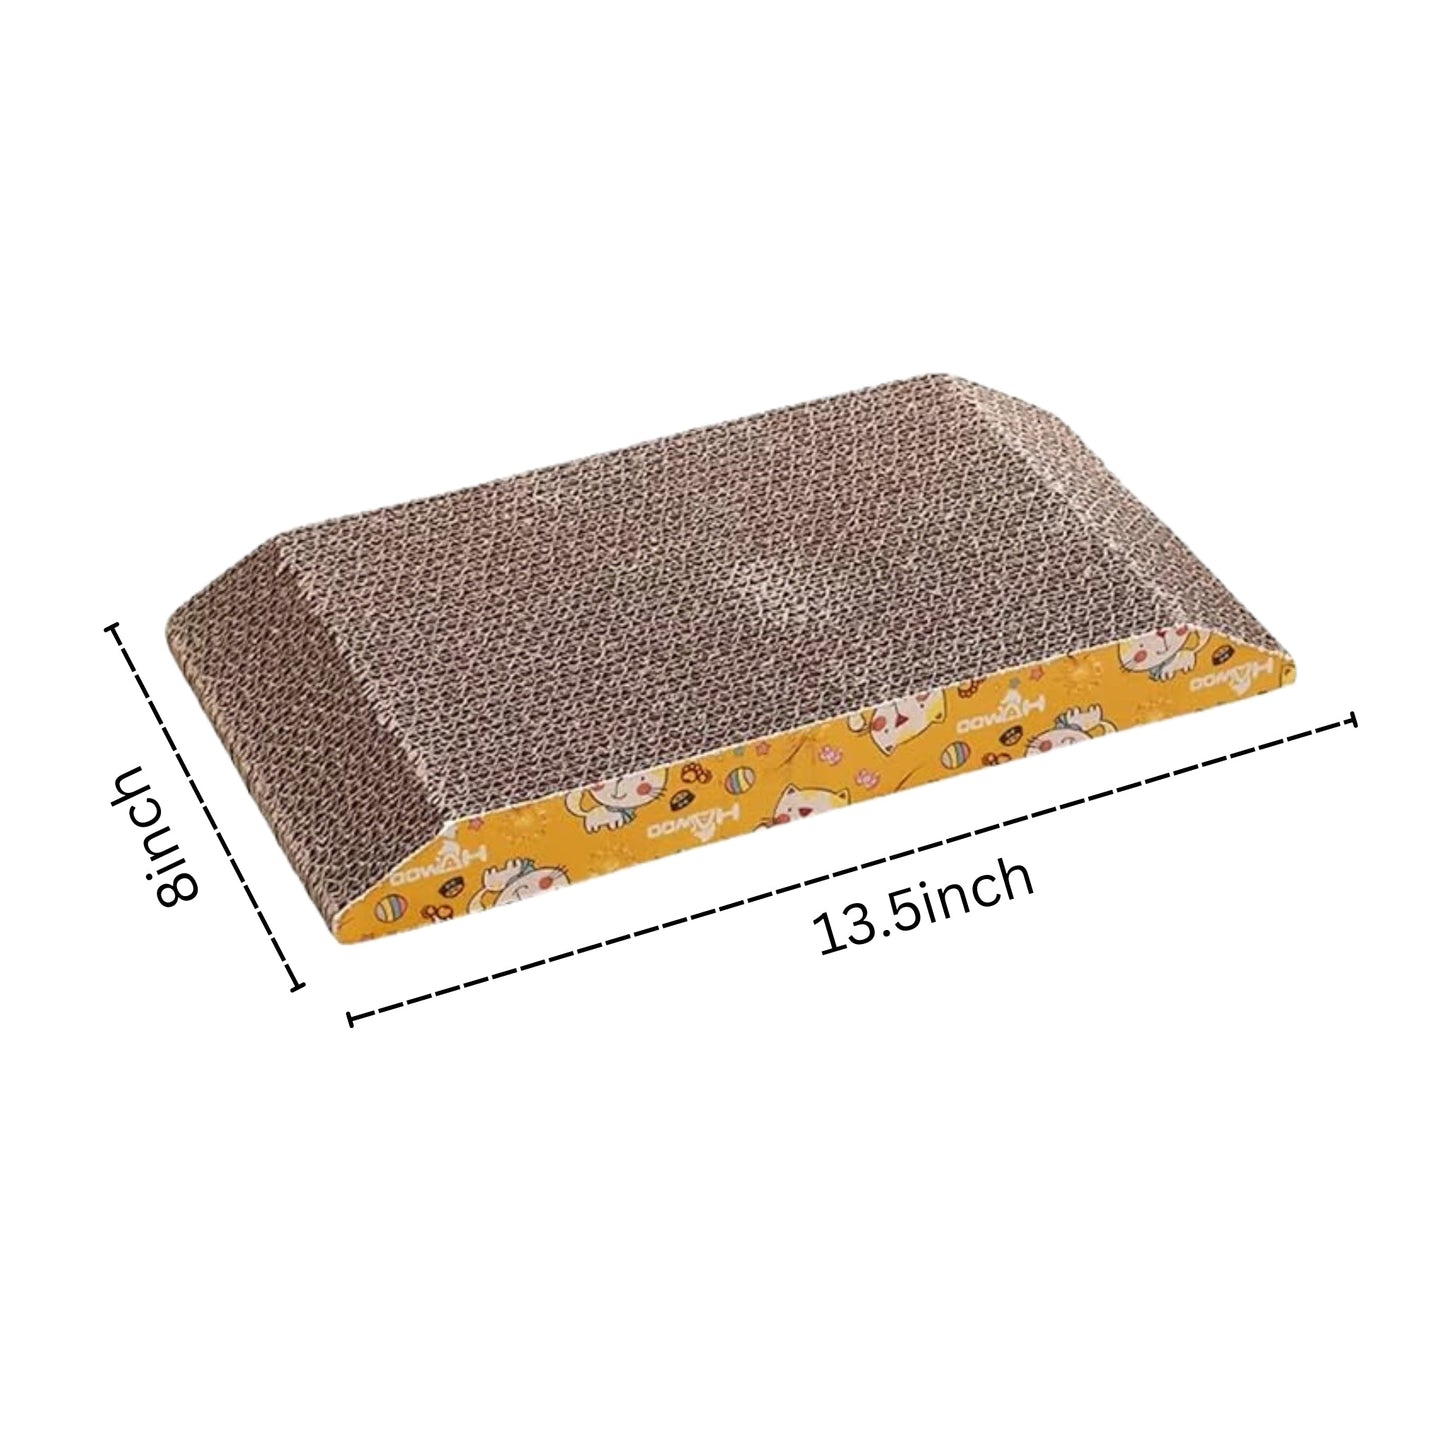 Foodie Puppies Corrugated Curve Scratcher for Cats & Kittens, Pack of 2